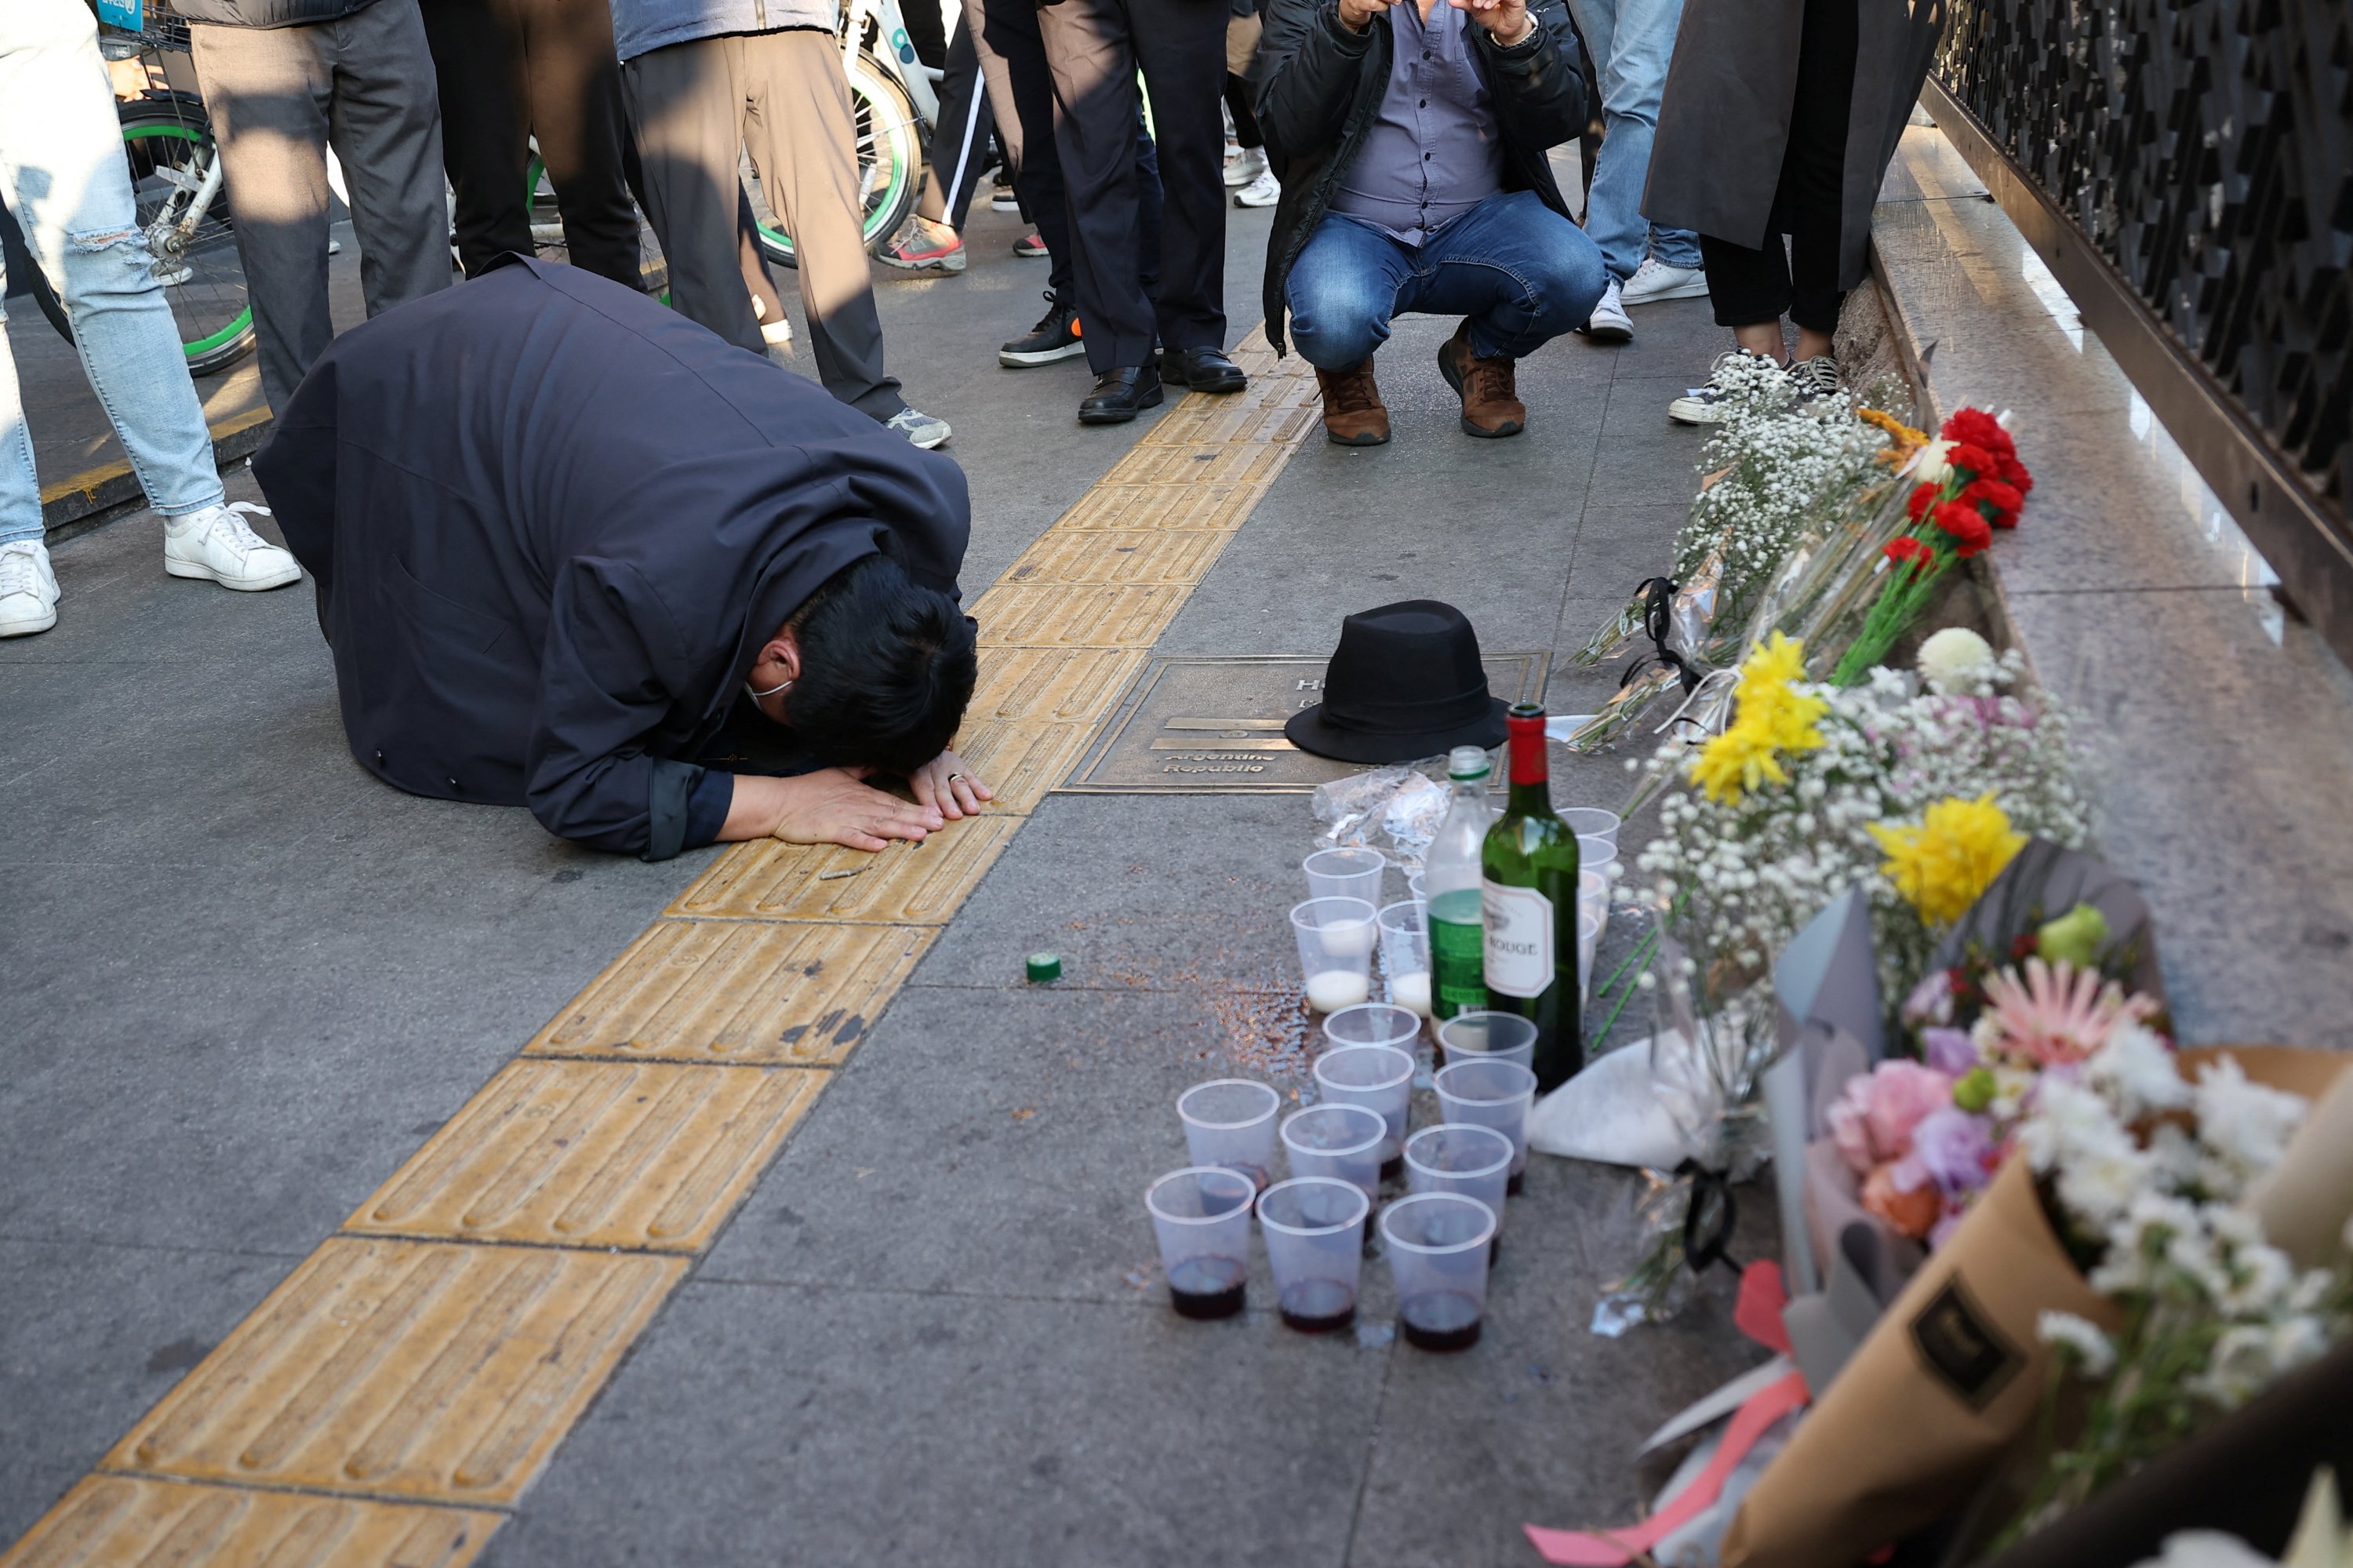 A man bows after paying tribute near the scene of the stampede during Halloween festivities, in Seoul, South Korea, Oct. 30, 2022. (Reuters Photo)